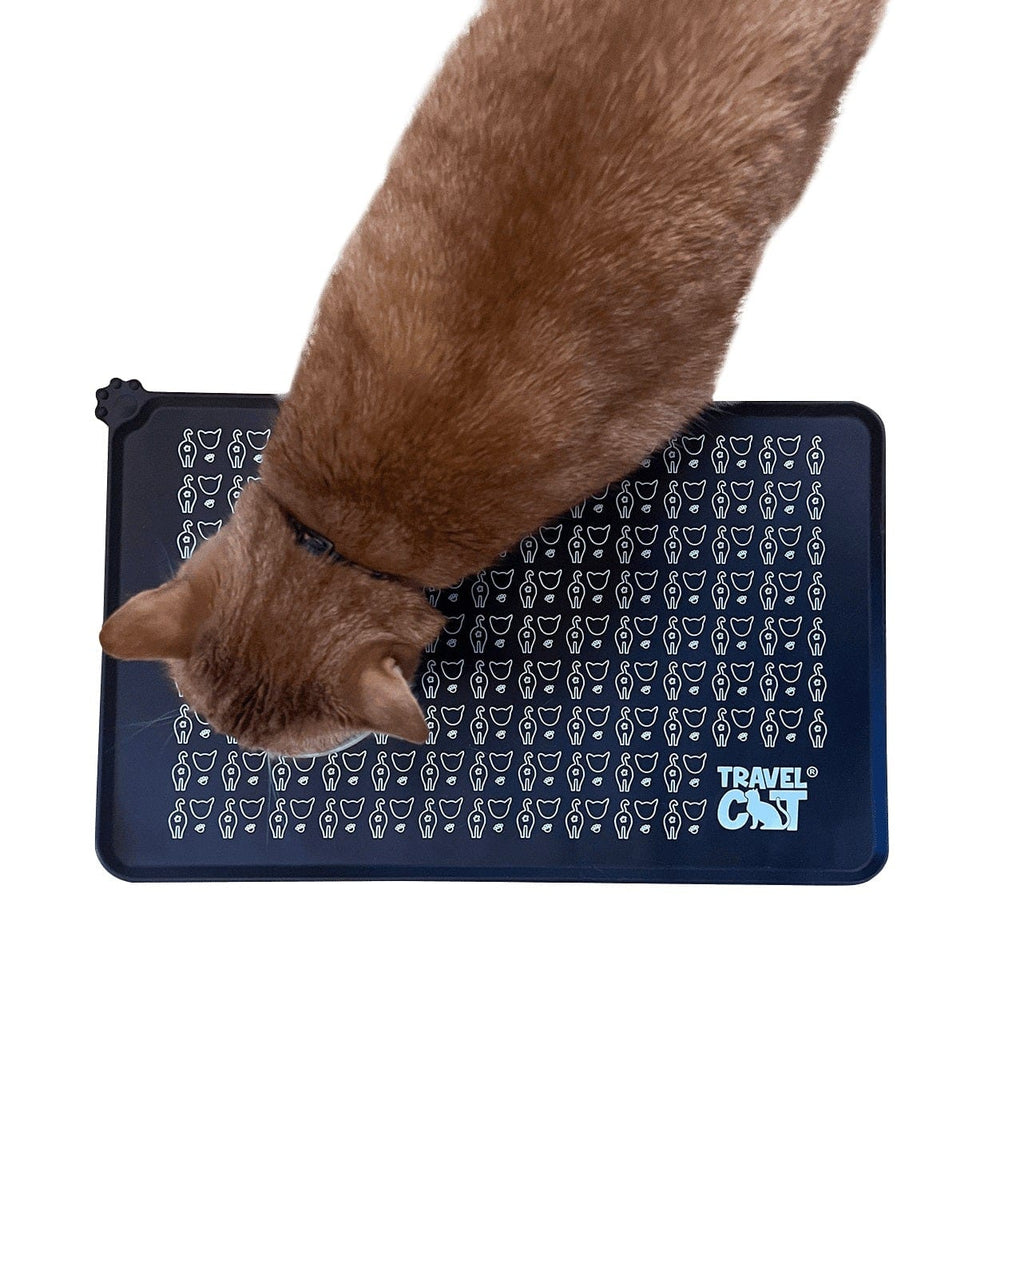  Travel Cat Food Mat - 18.5 x 11.5 Large Silicone Cat Feeding  Mat for Cats Food and Water Bowls - Waterproof, Easy Grip, Easy to Clean  Pet Feeding Mat for Indoor